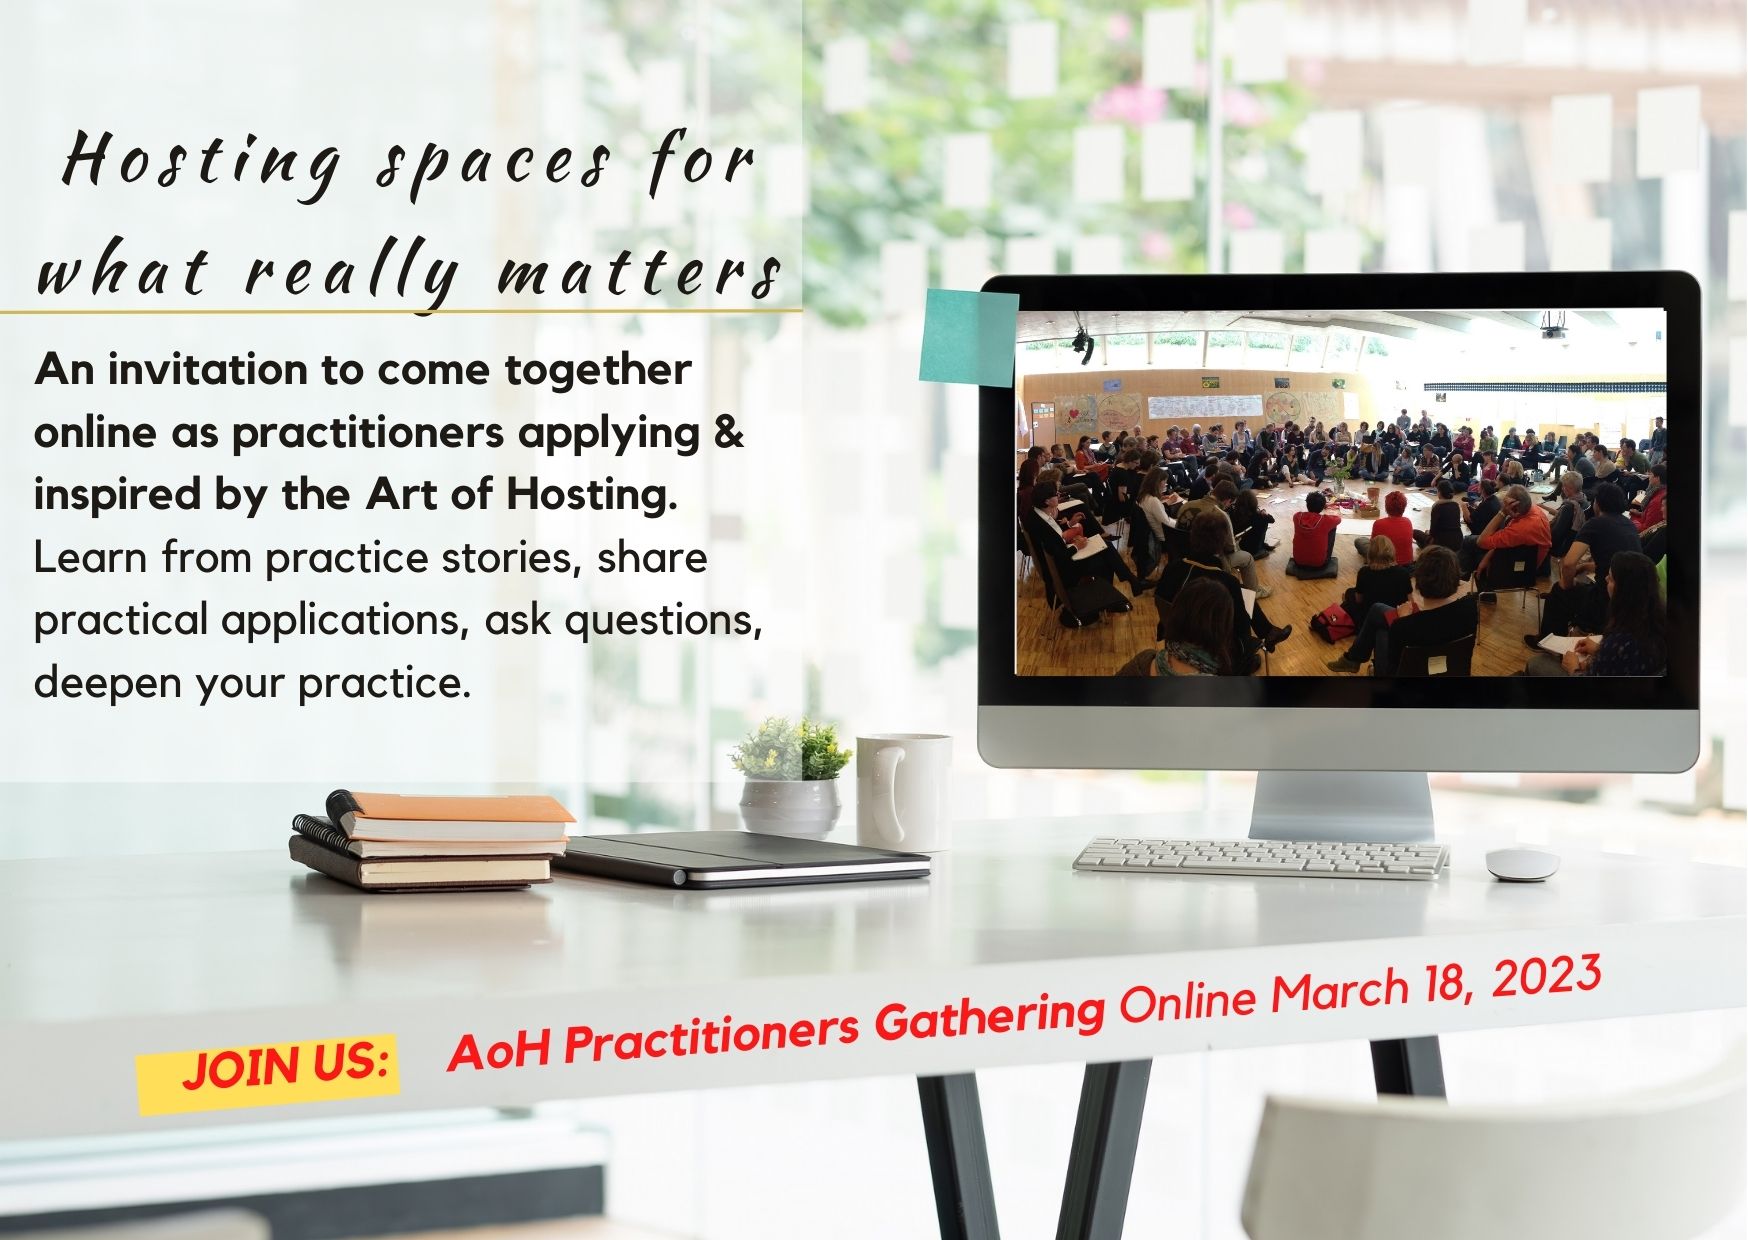 AoH Practitioners Gathering Online